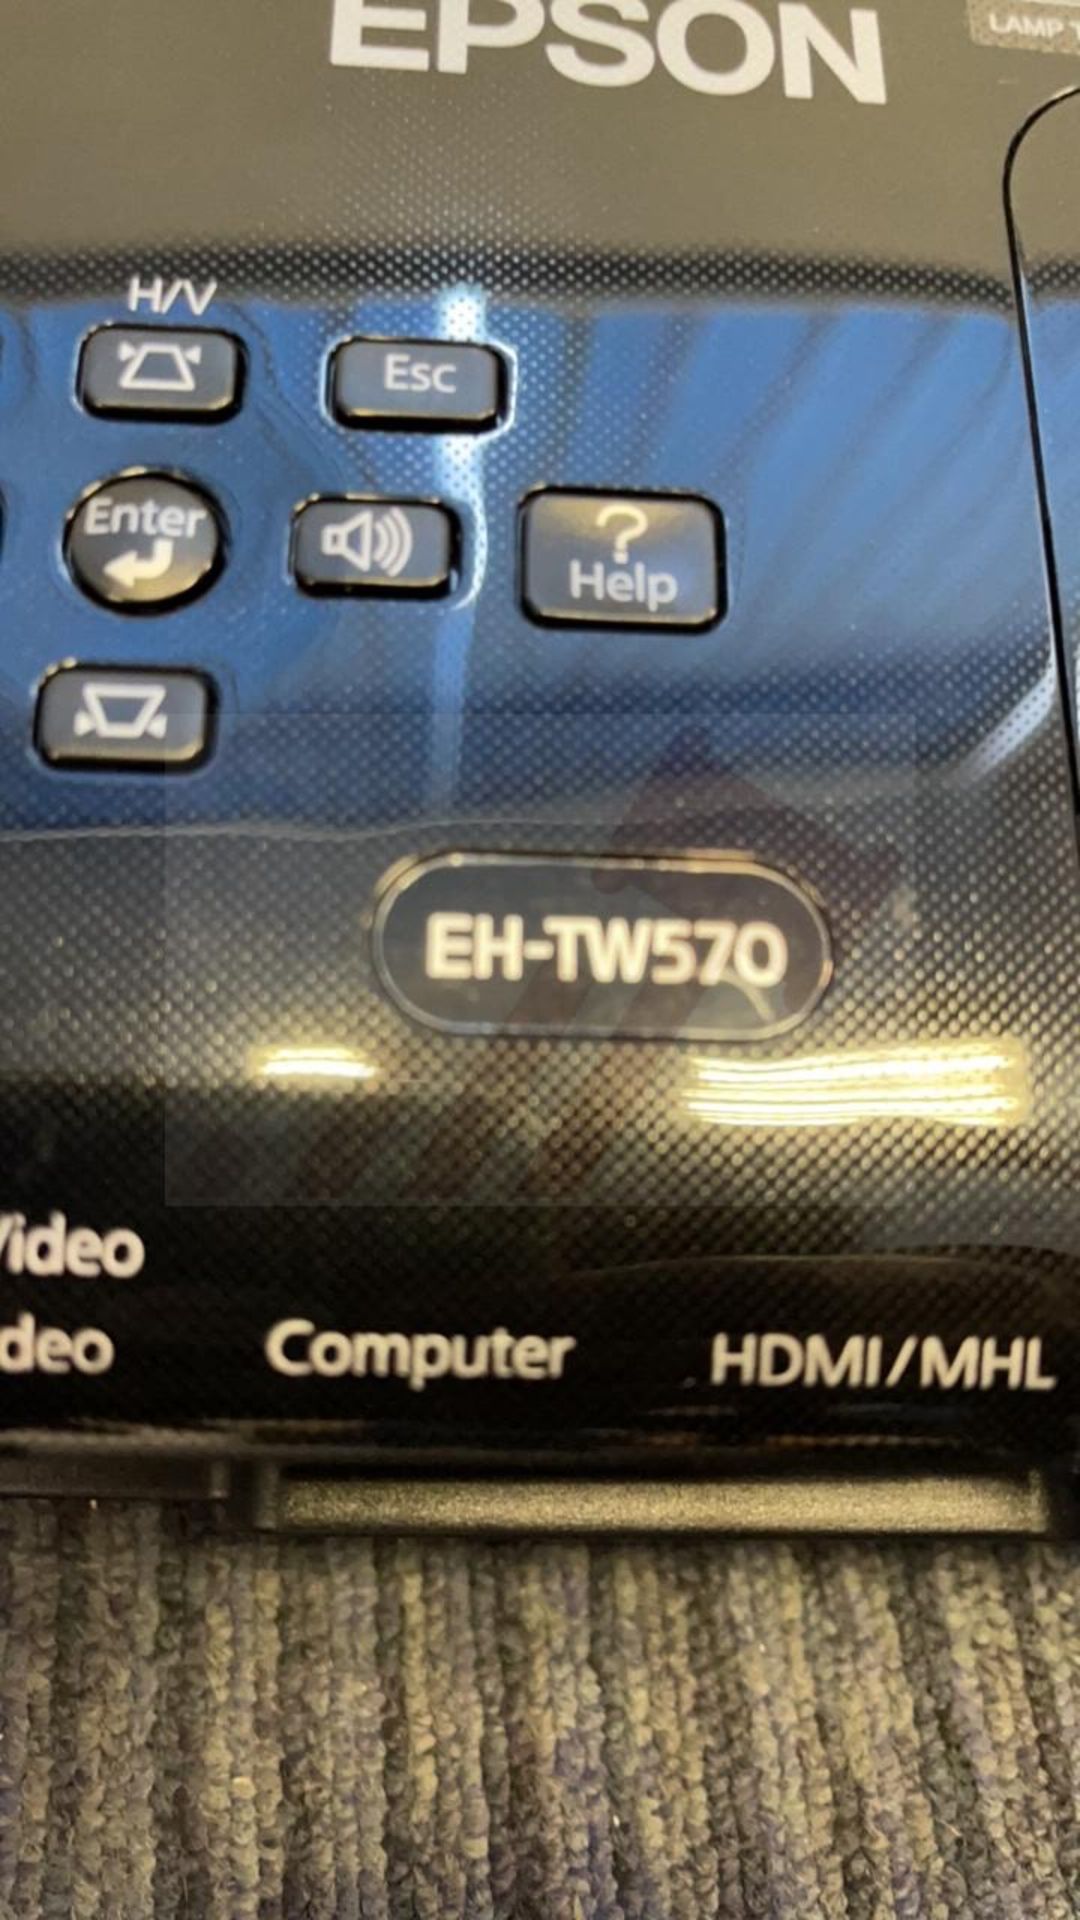 Epson EH-TW570 LCD Projector - Image 4 of 5